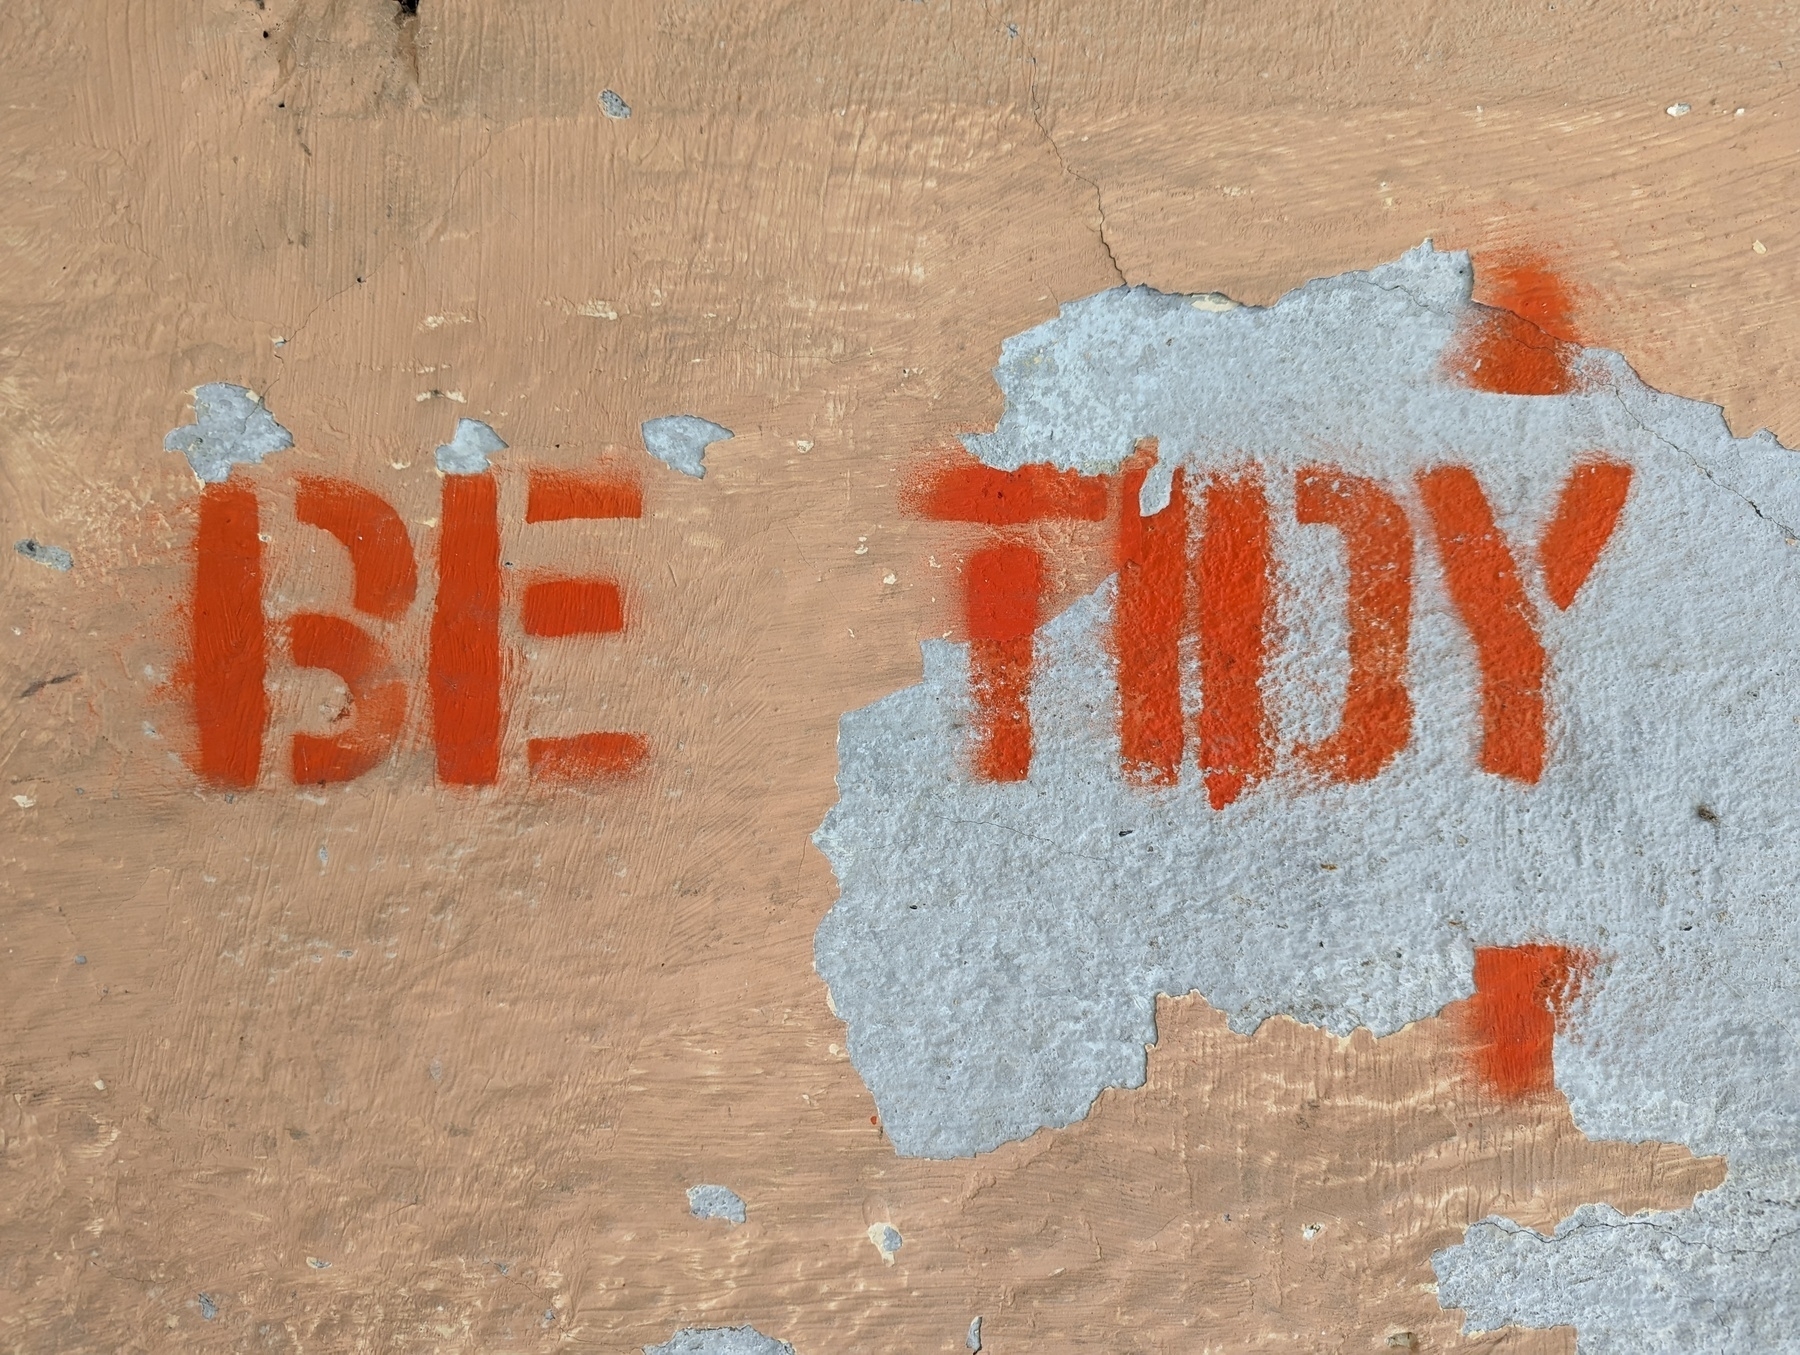 A stenciled sign painted in orange over old, peeling paint on a wall reads: Be tidy.